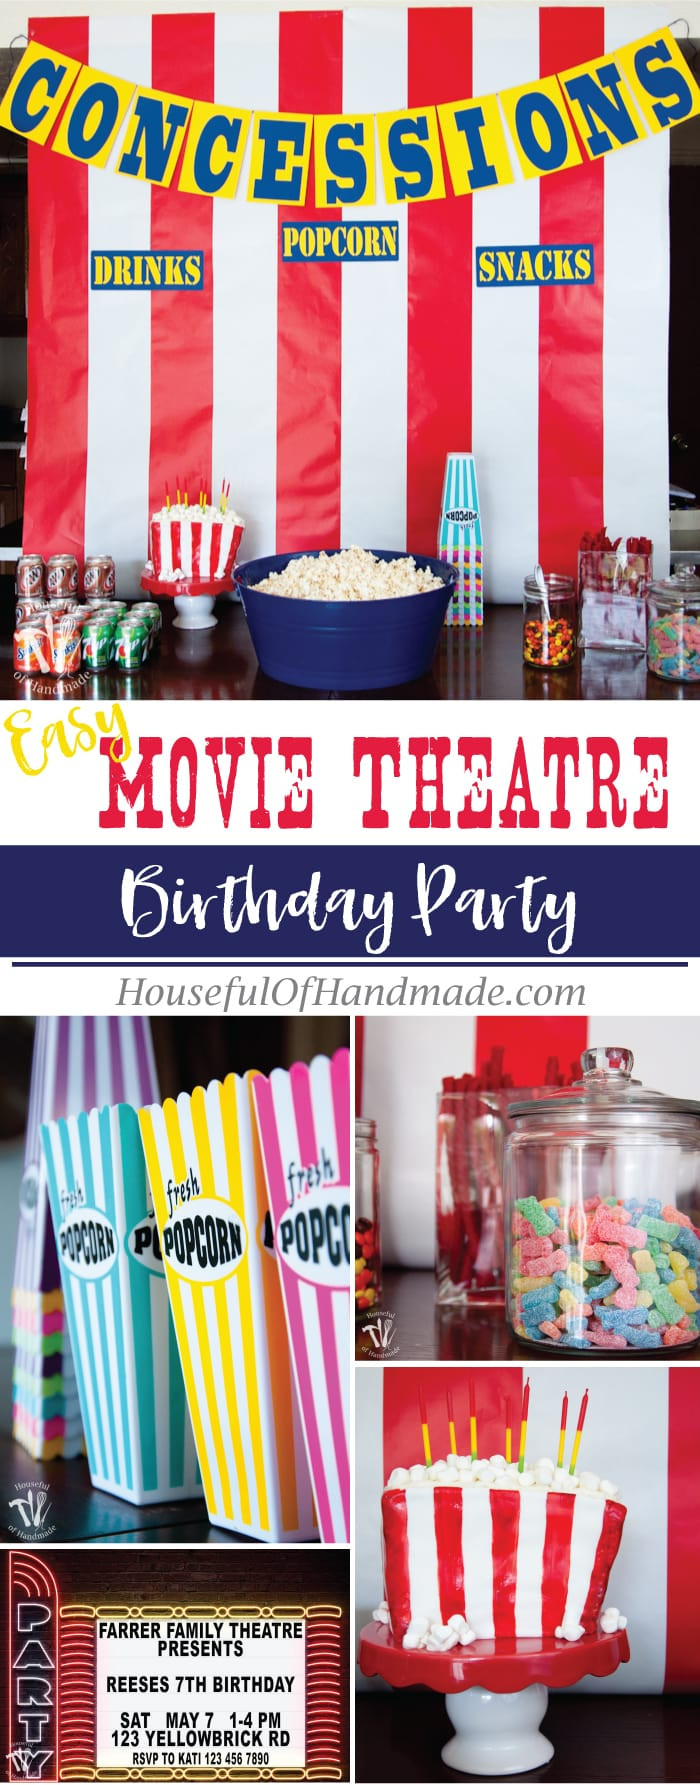 Movie Theater Birthday Party Ideas
 Movie Theatre Themed Birthday Party Houseful of Handmade